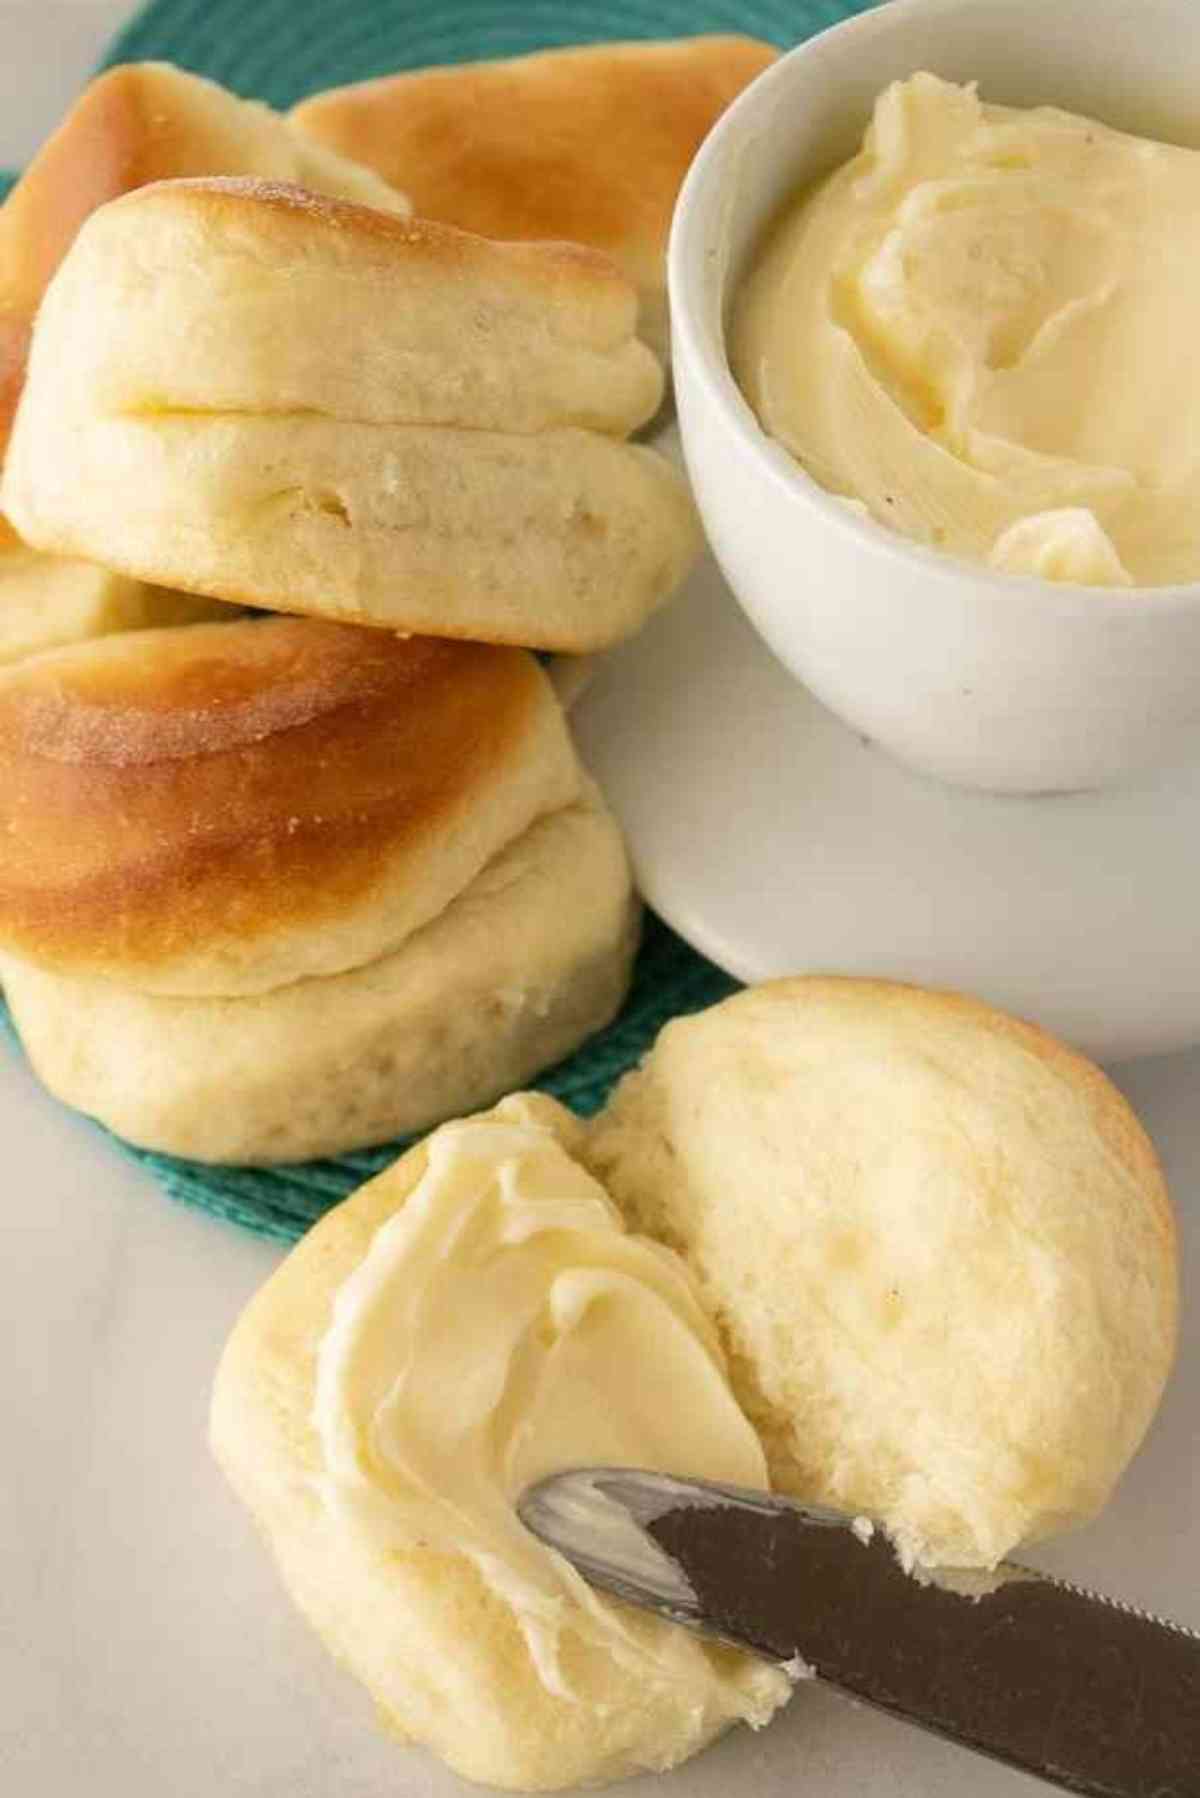 A buttered Parker House Roll